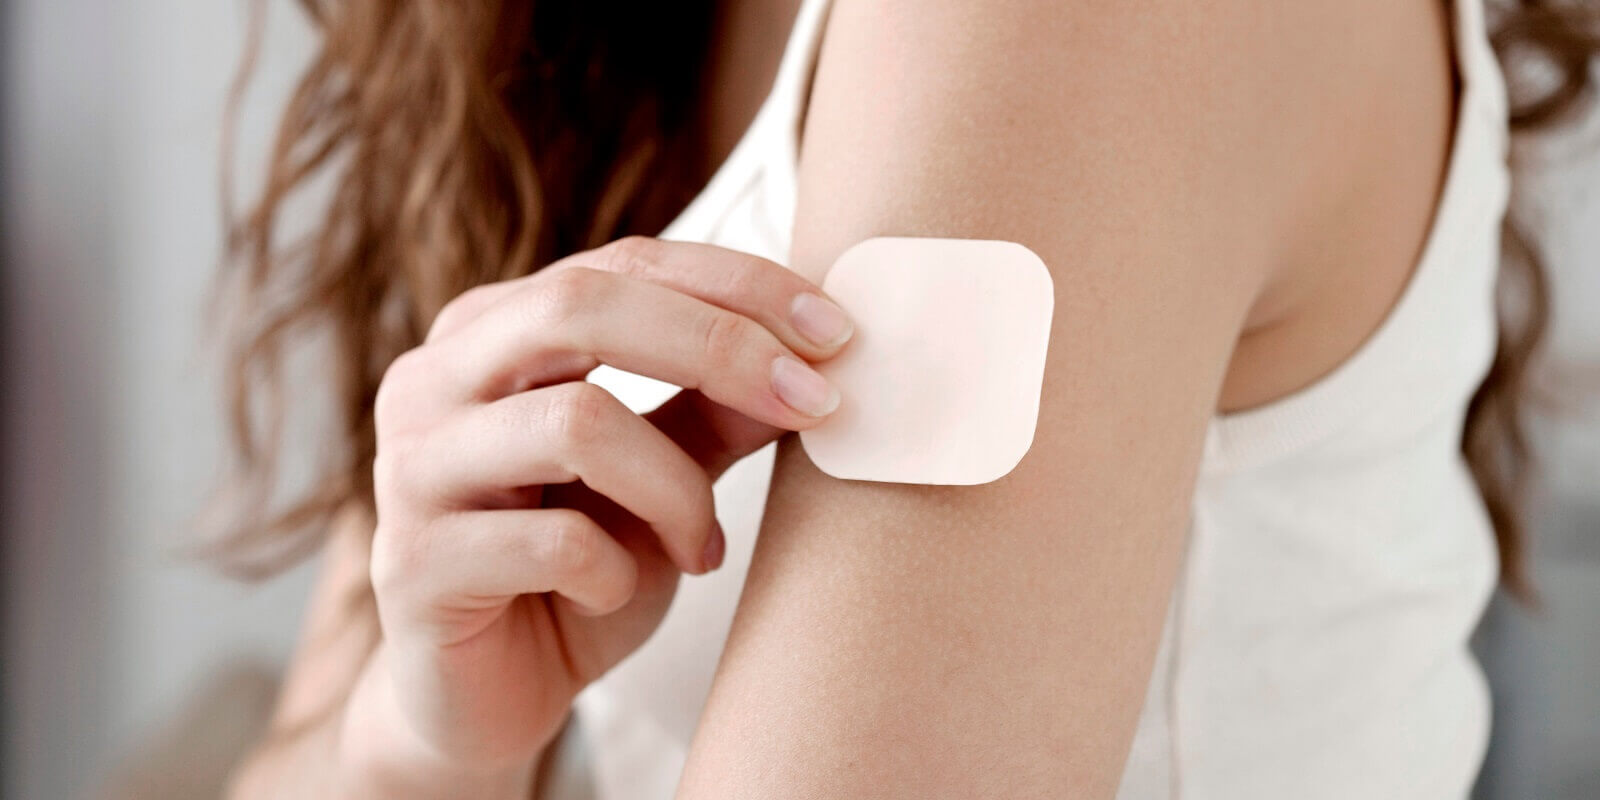 woman putting on contraception patch